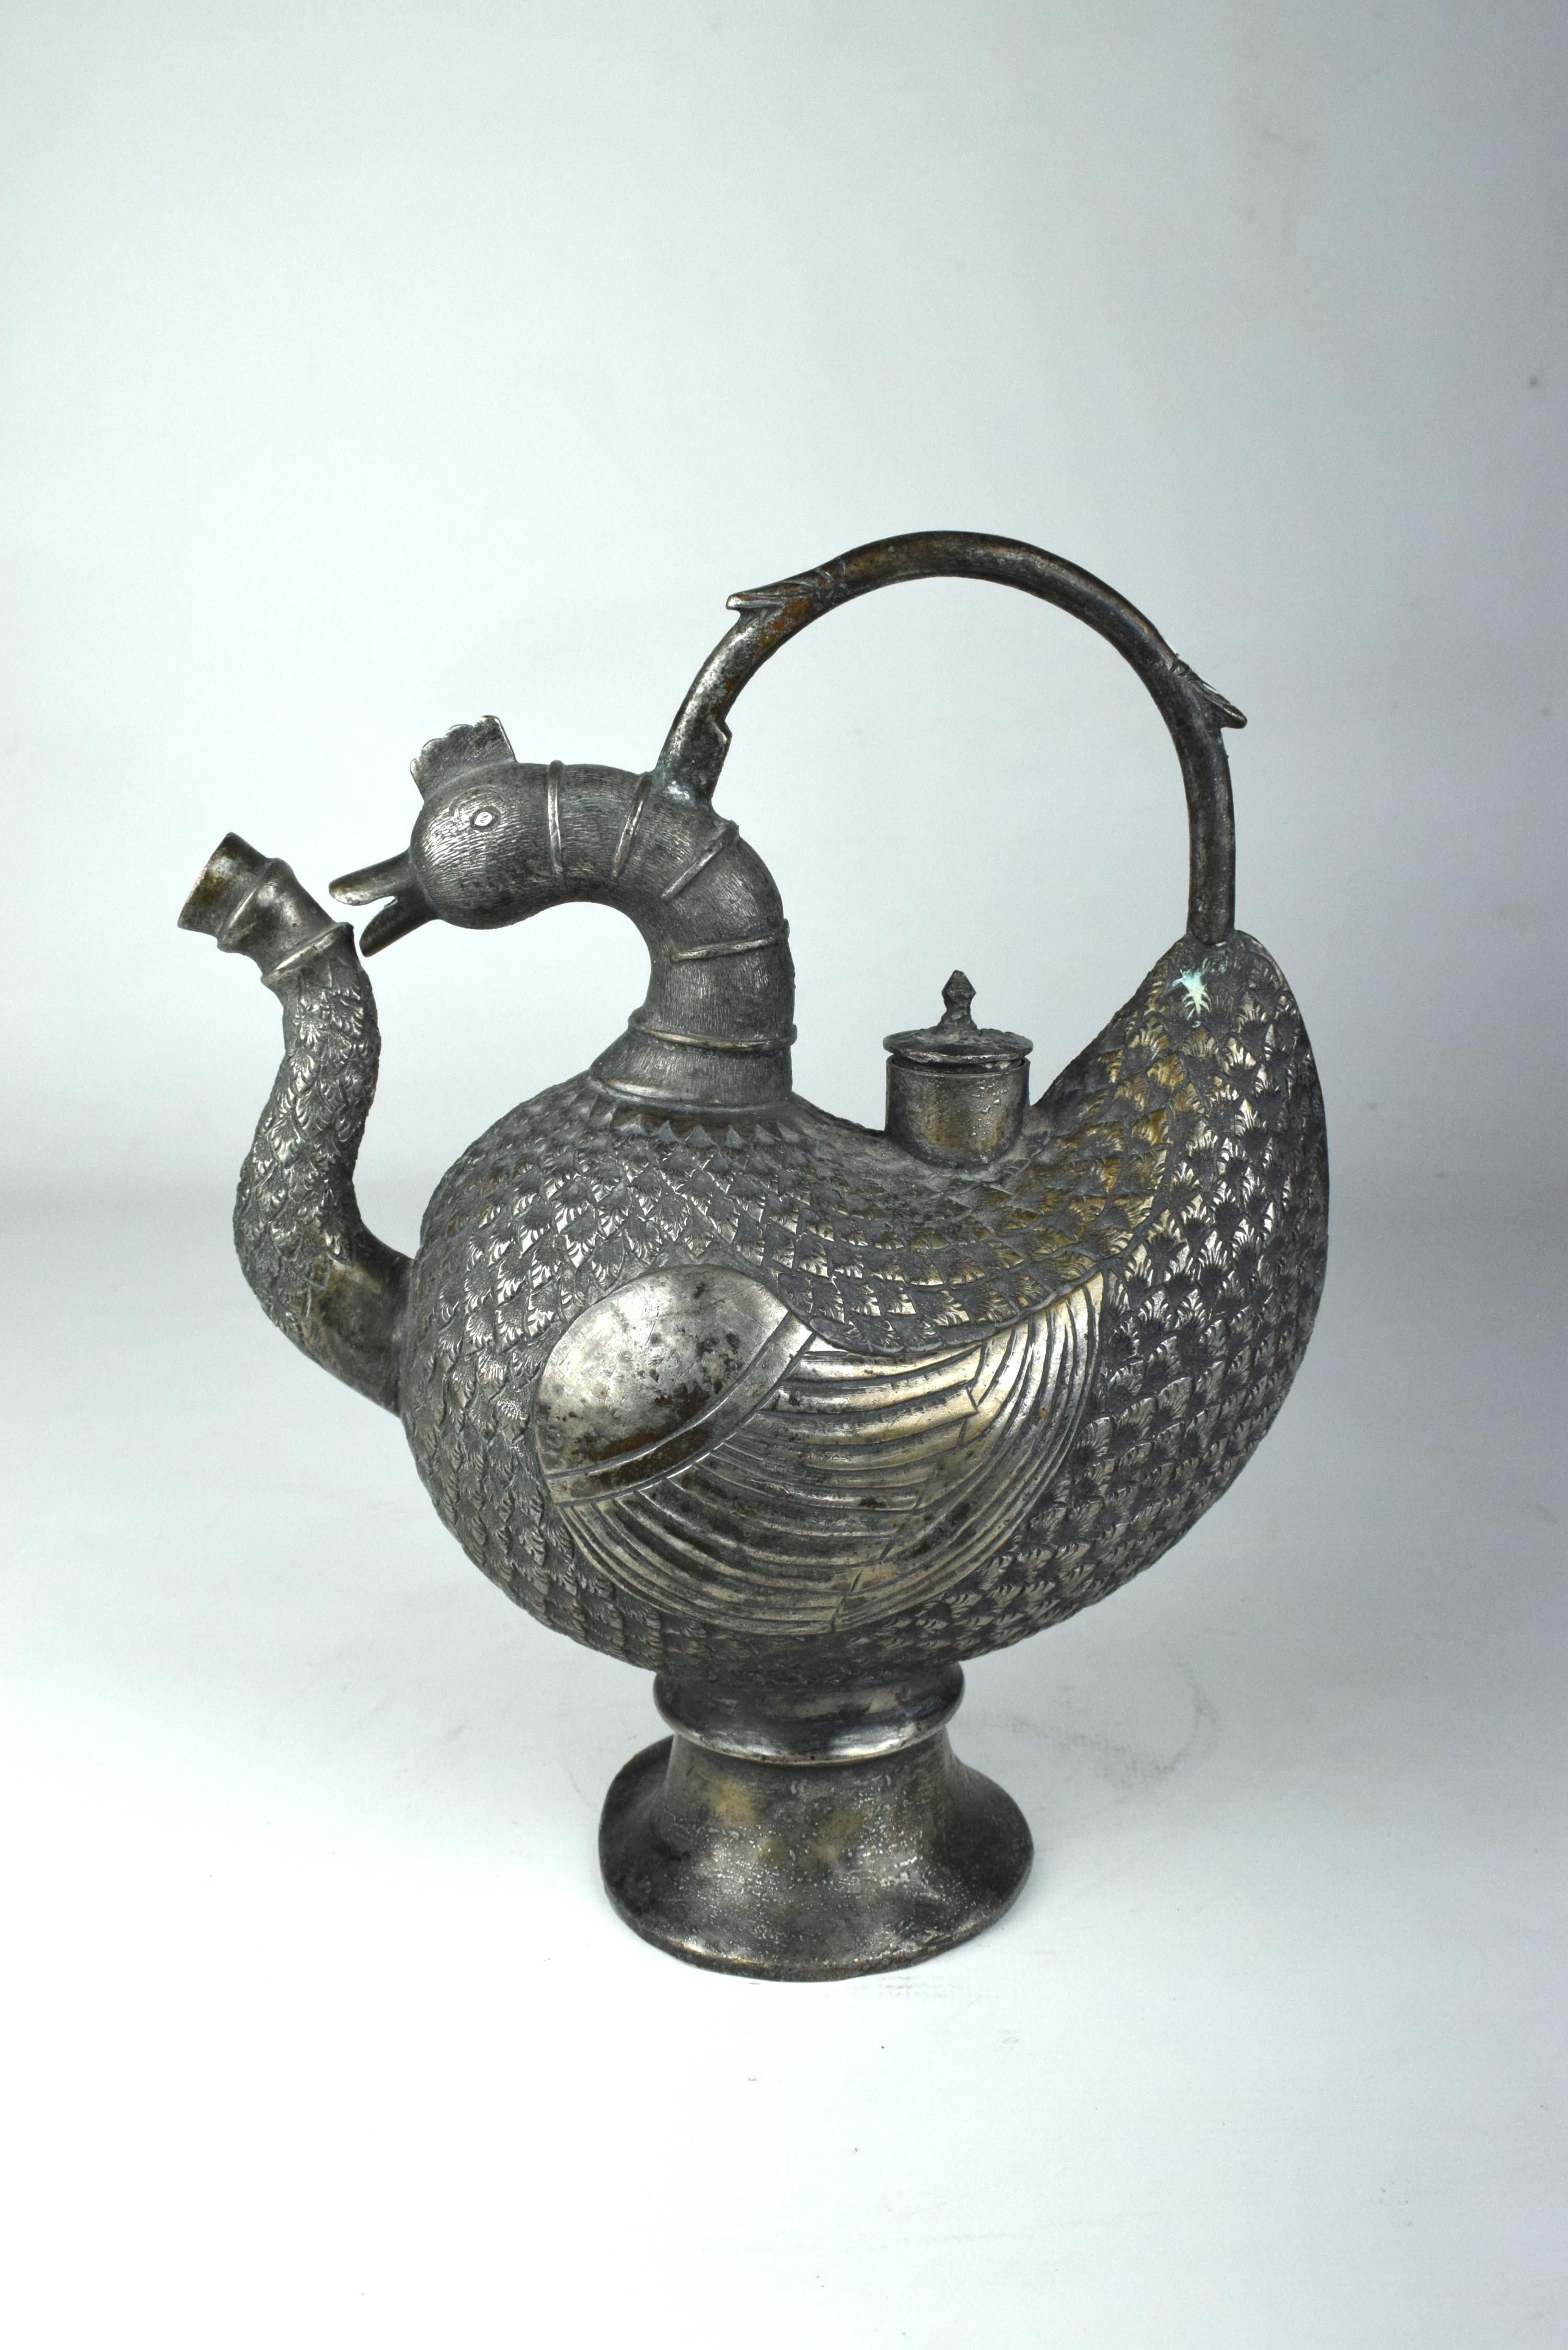 This exquisite piece of art seamlessly combines the intricate aesthetics of Mughal design with the skilled craftsmanship of Kashmiri artisans, resulting in a stunning and unique creation.

The copper ewer takes the form of a bird, with its body